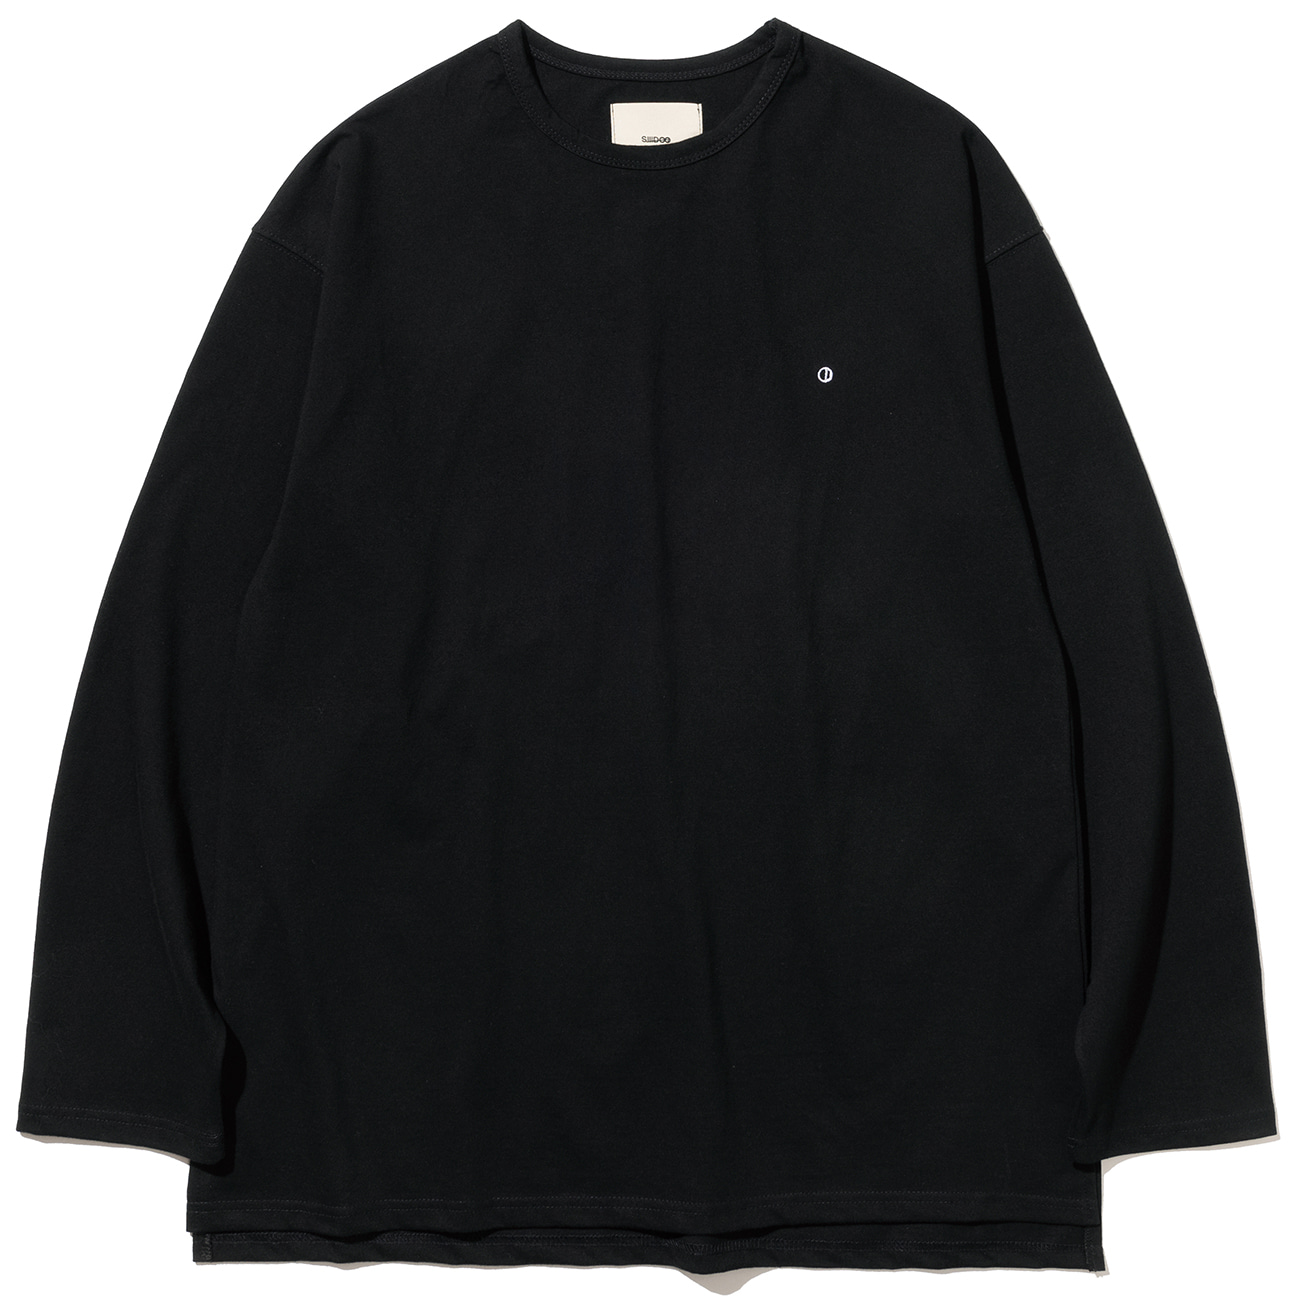 SDDL SIGNATURE BASIC ROUND NECK LONG SLEEVES T #2 (1st restock)